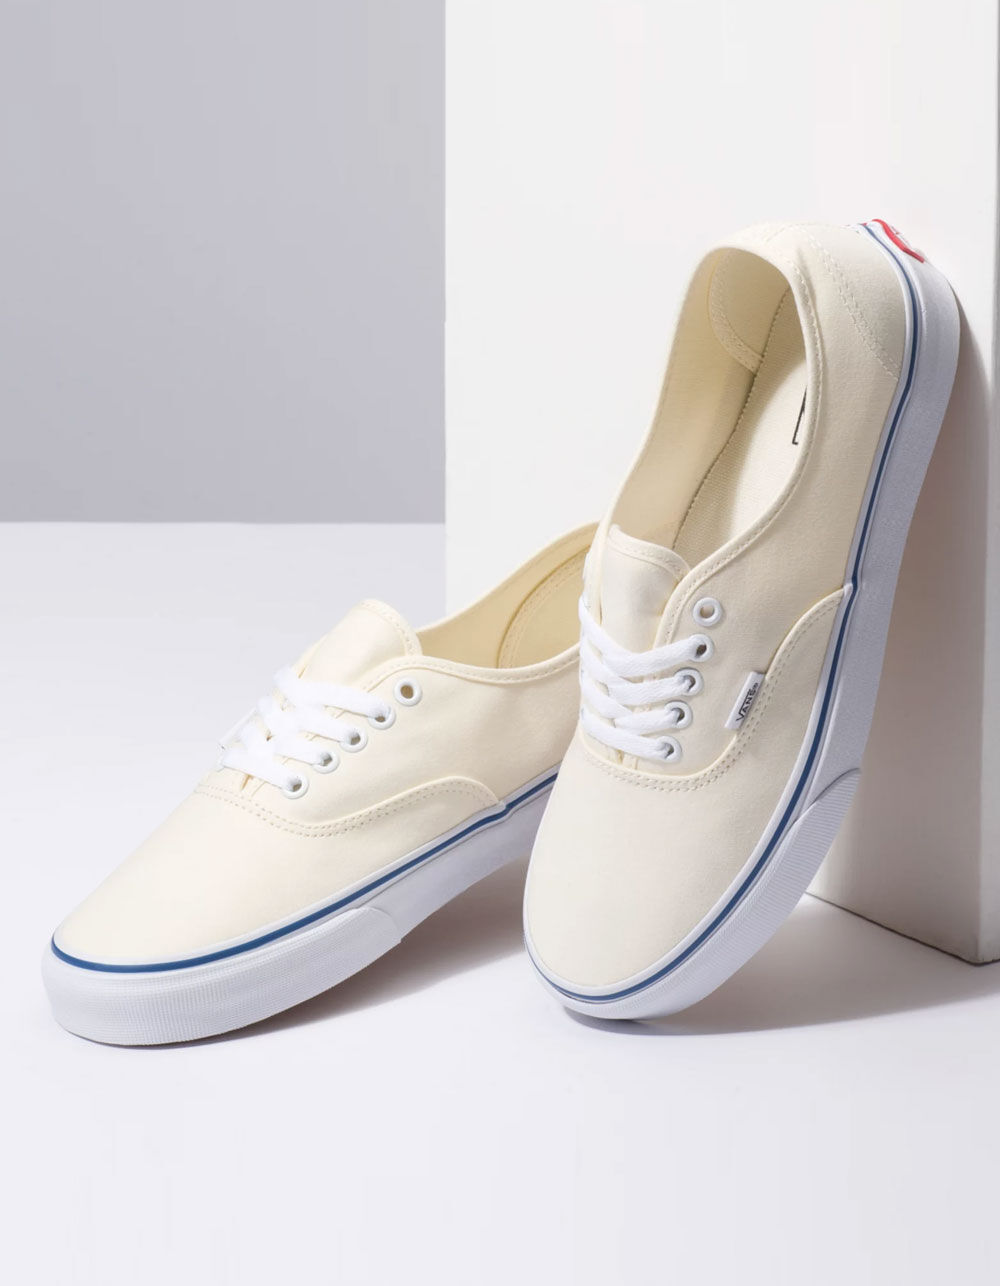 VANS AUTHENTIC SHOES MENS SIZE 8 WOMENS 10.5 OFF WHITE CREAM BEIGE SNEAKER  NEW